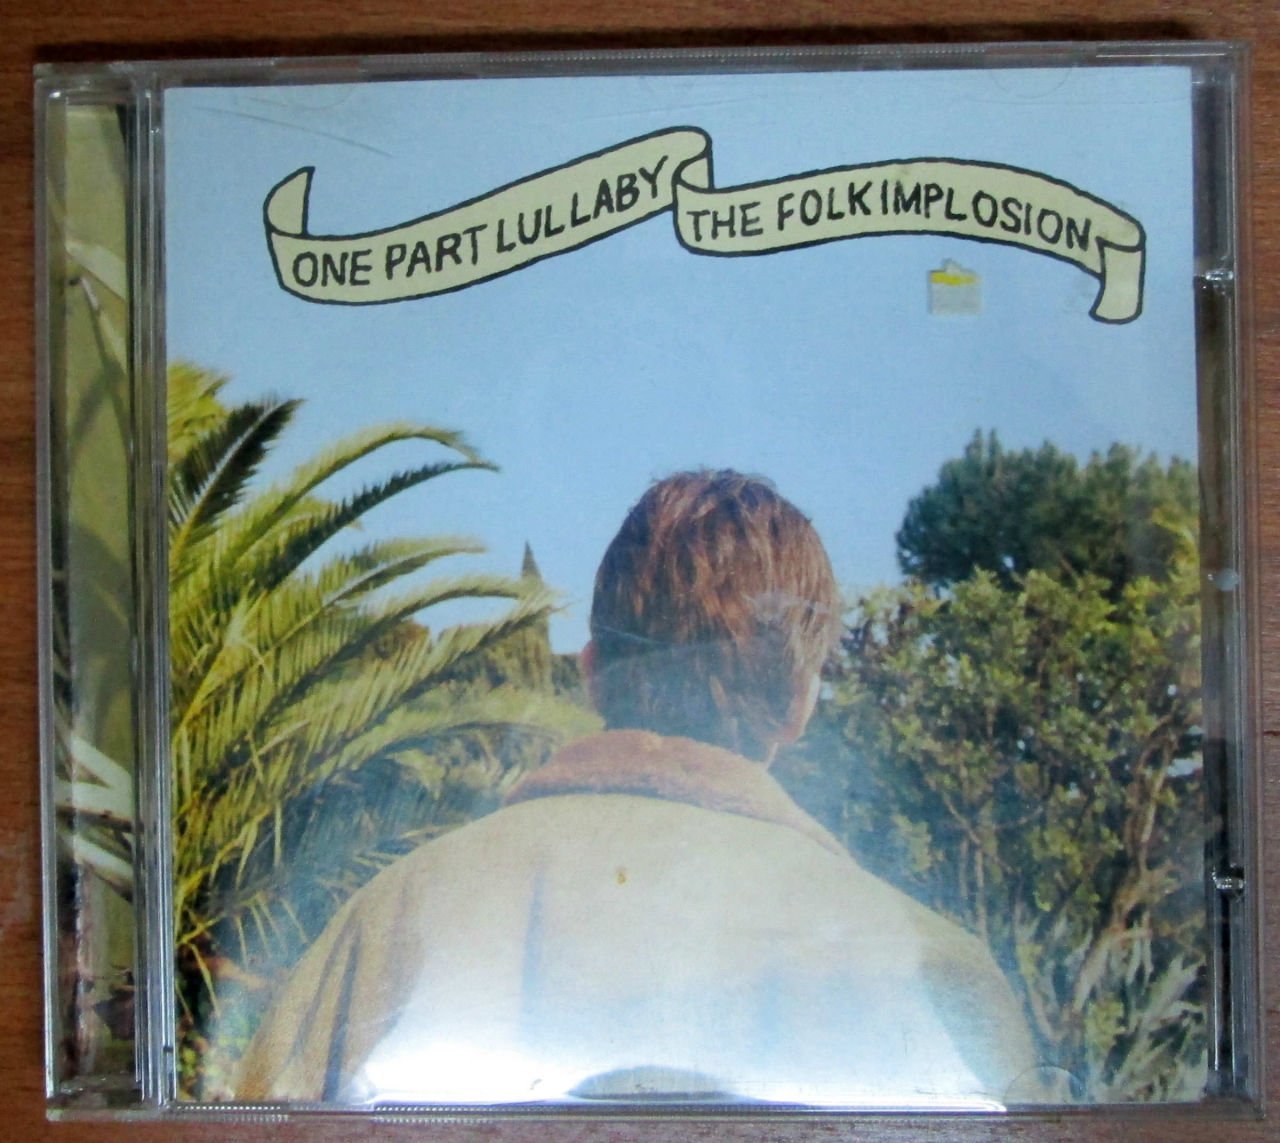 THE FOLK IMPLOSION - ONE PART LULLABY CD 2.EL